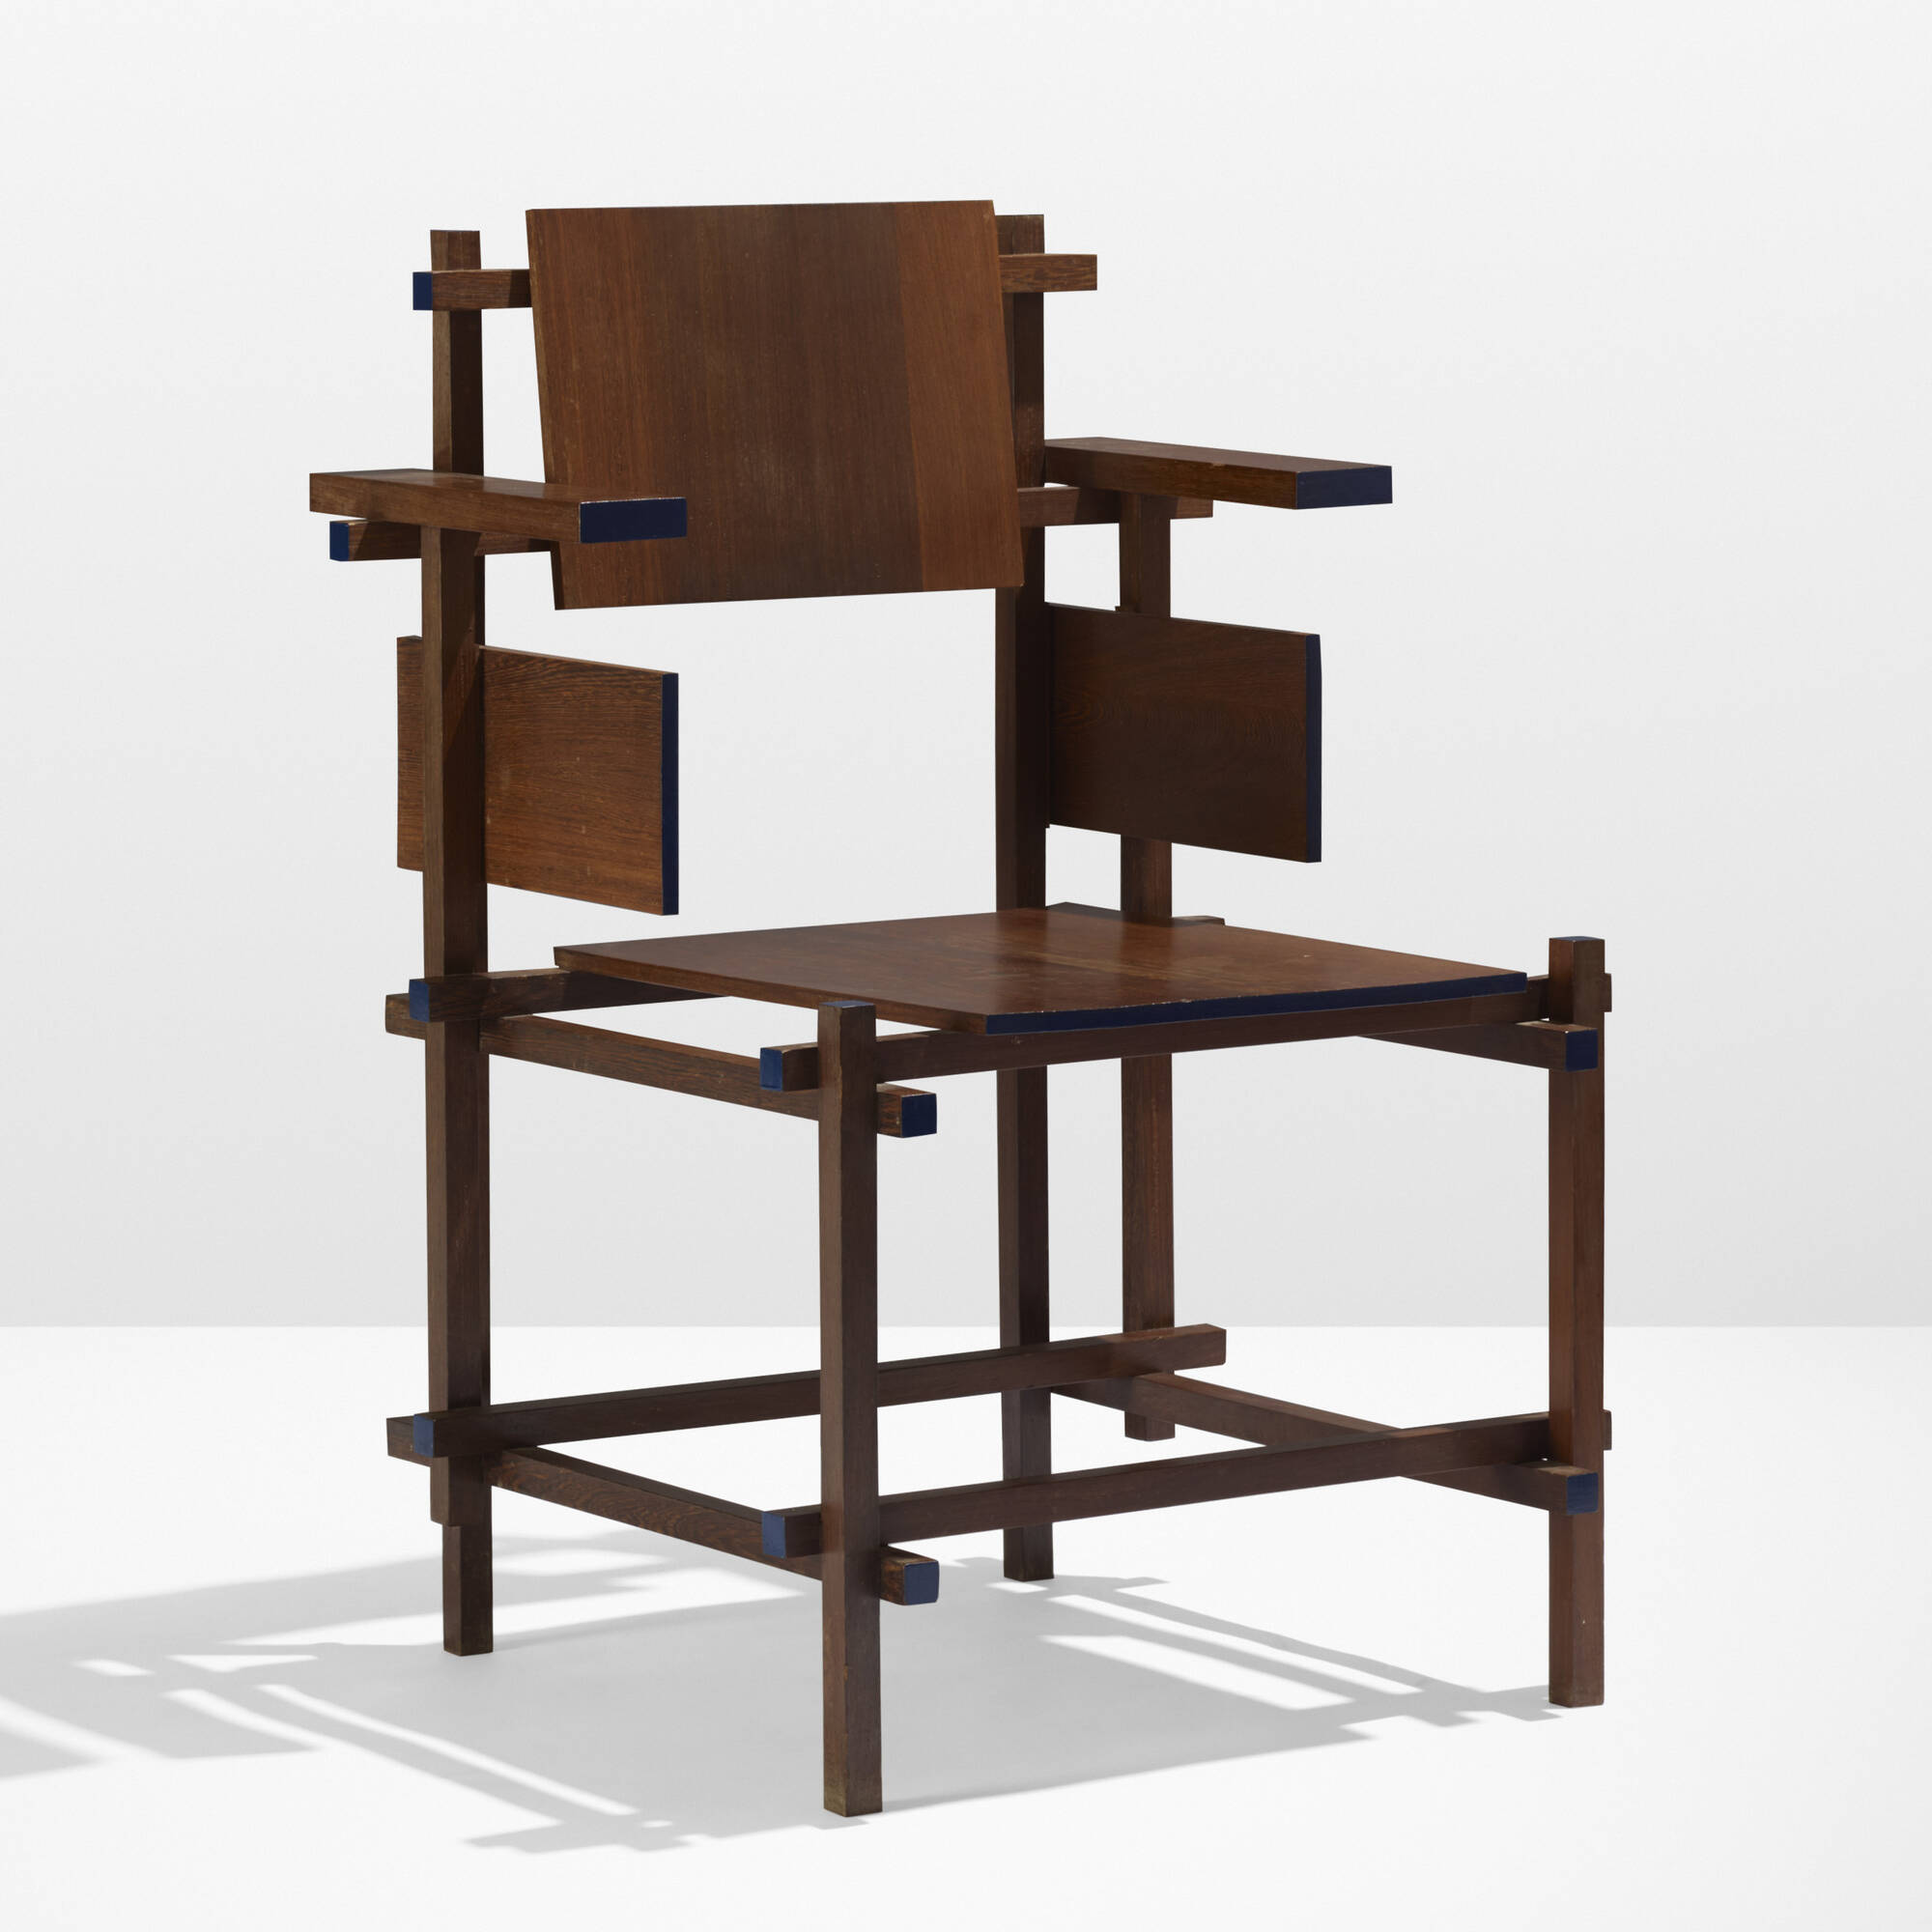 raket Top Ontkennen 107: GERRIT RIETVELD, Hoge Stoel < International Style: The Boyd  Collection, 7 November 2019 < Auctions | Wright: Auctions of Art and Design